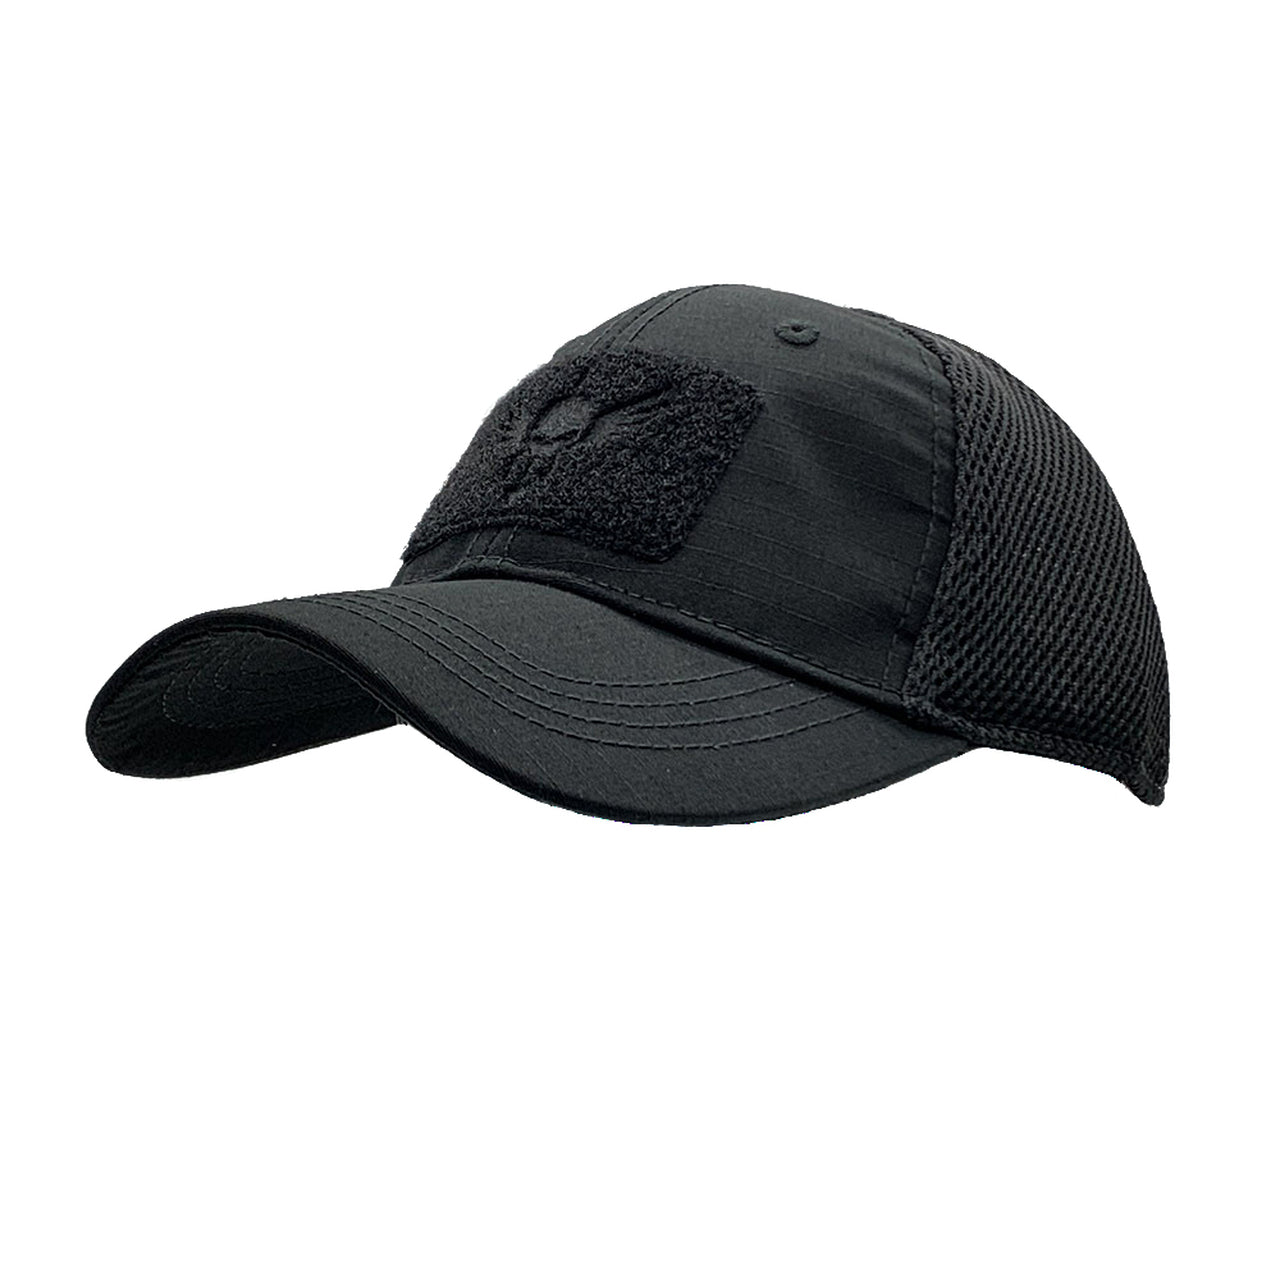 A Shellback Tactical Flex Tactical Cap with a patch on the front.